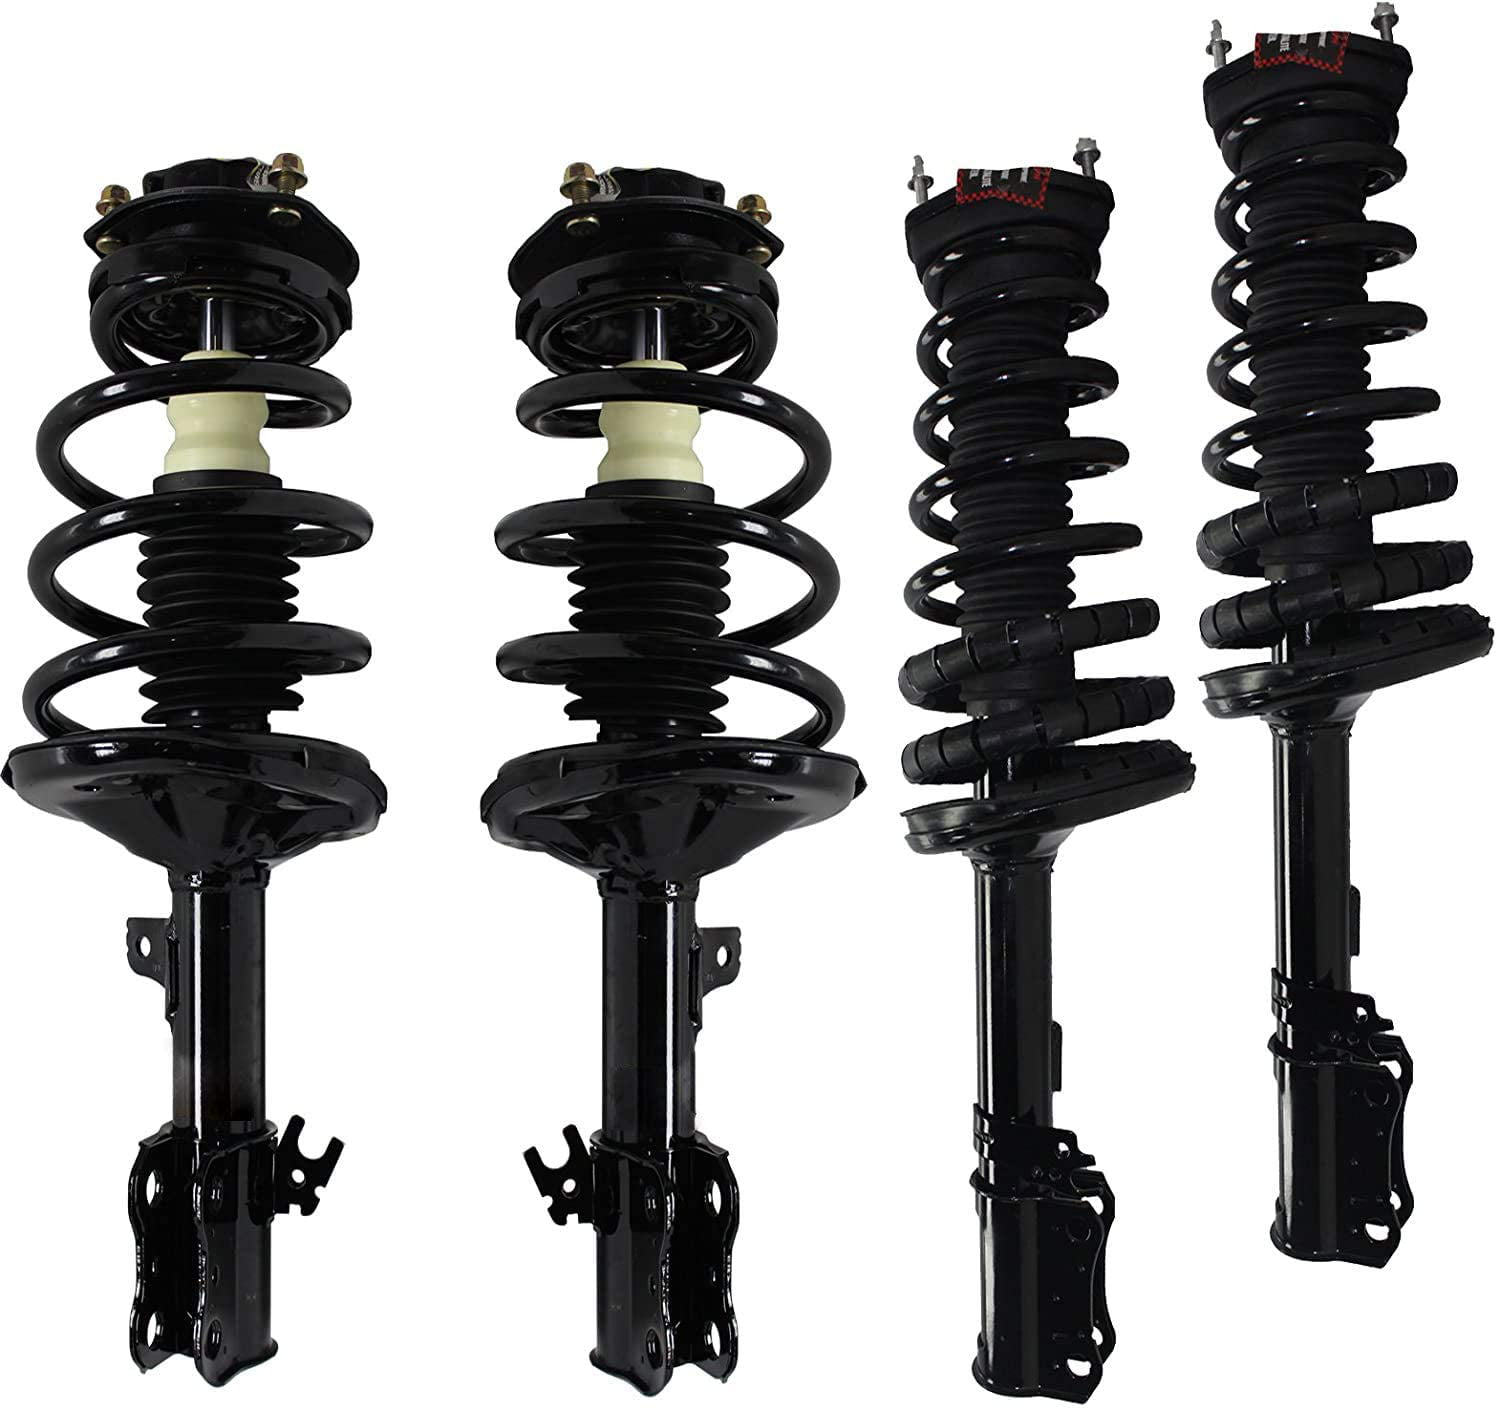 LSAILON 4 pcs Front Rear Struts Shocks Absorbers Replacement for 1997-2001 Lexus ES300,1997-2003 Toyota Avalon,1997-2001 Toyota Camry,1999-2003 Toyota Solara 334245 334246 334133 334134